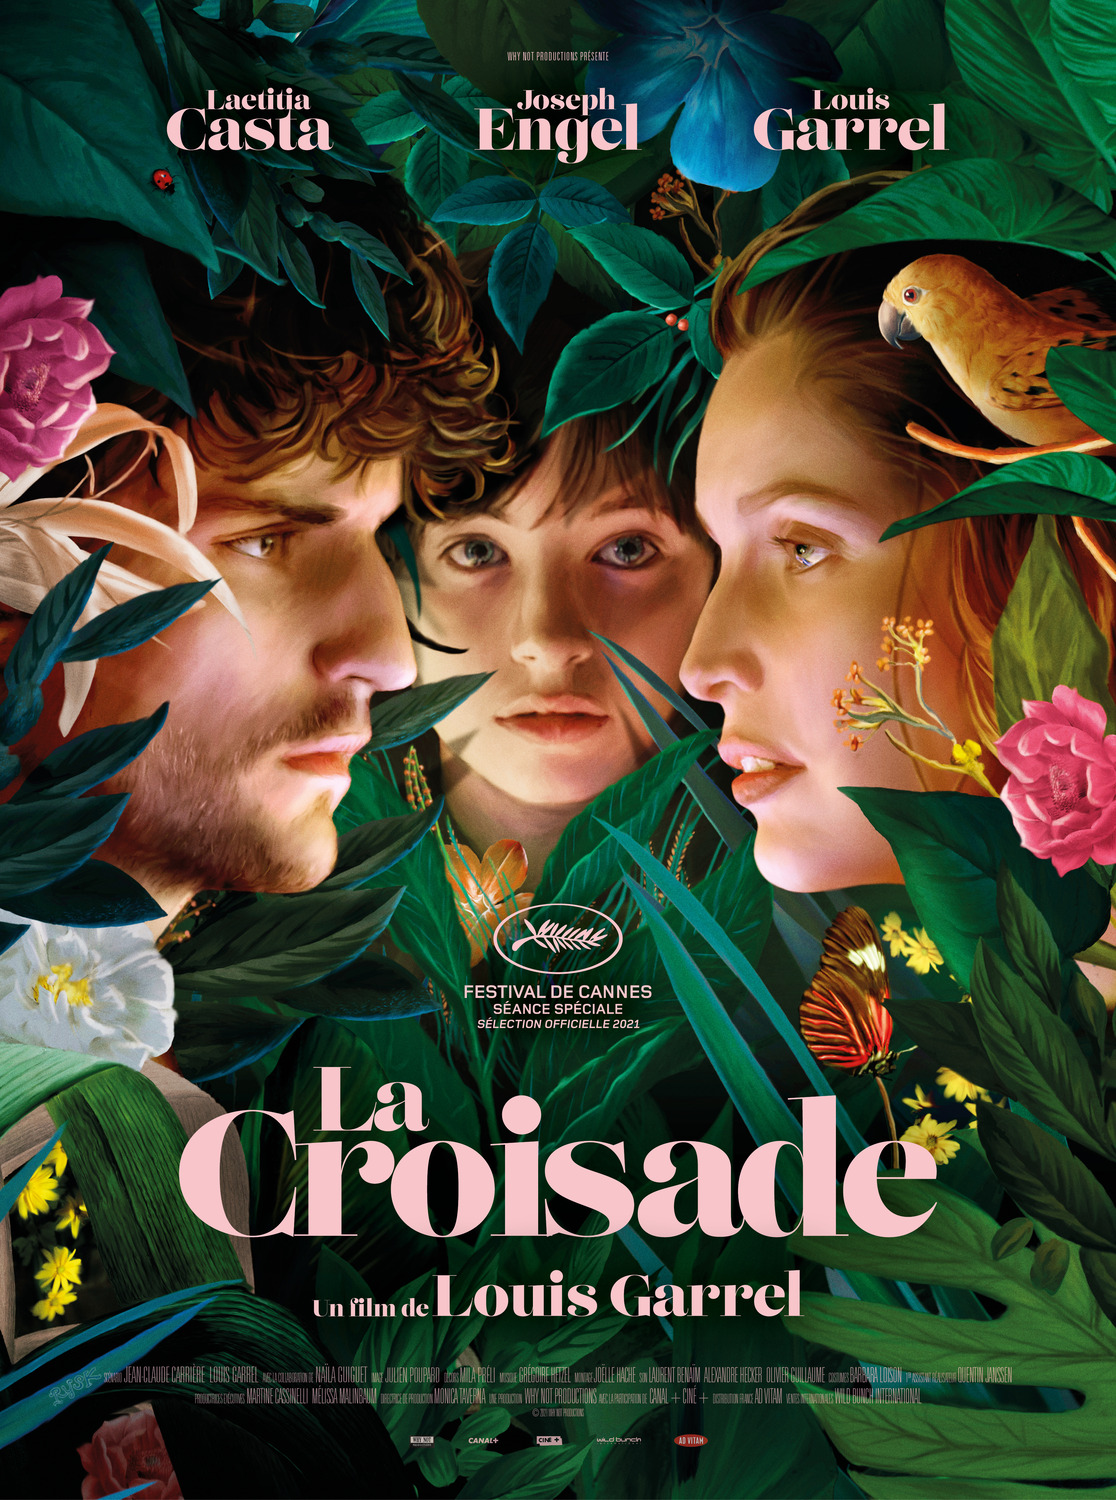 Extra Large Movie Poster Image for La croisade 